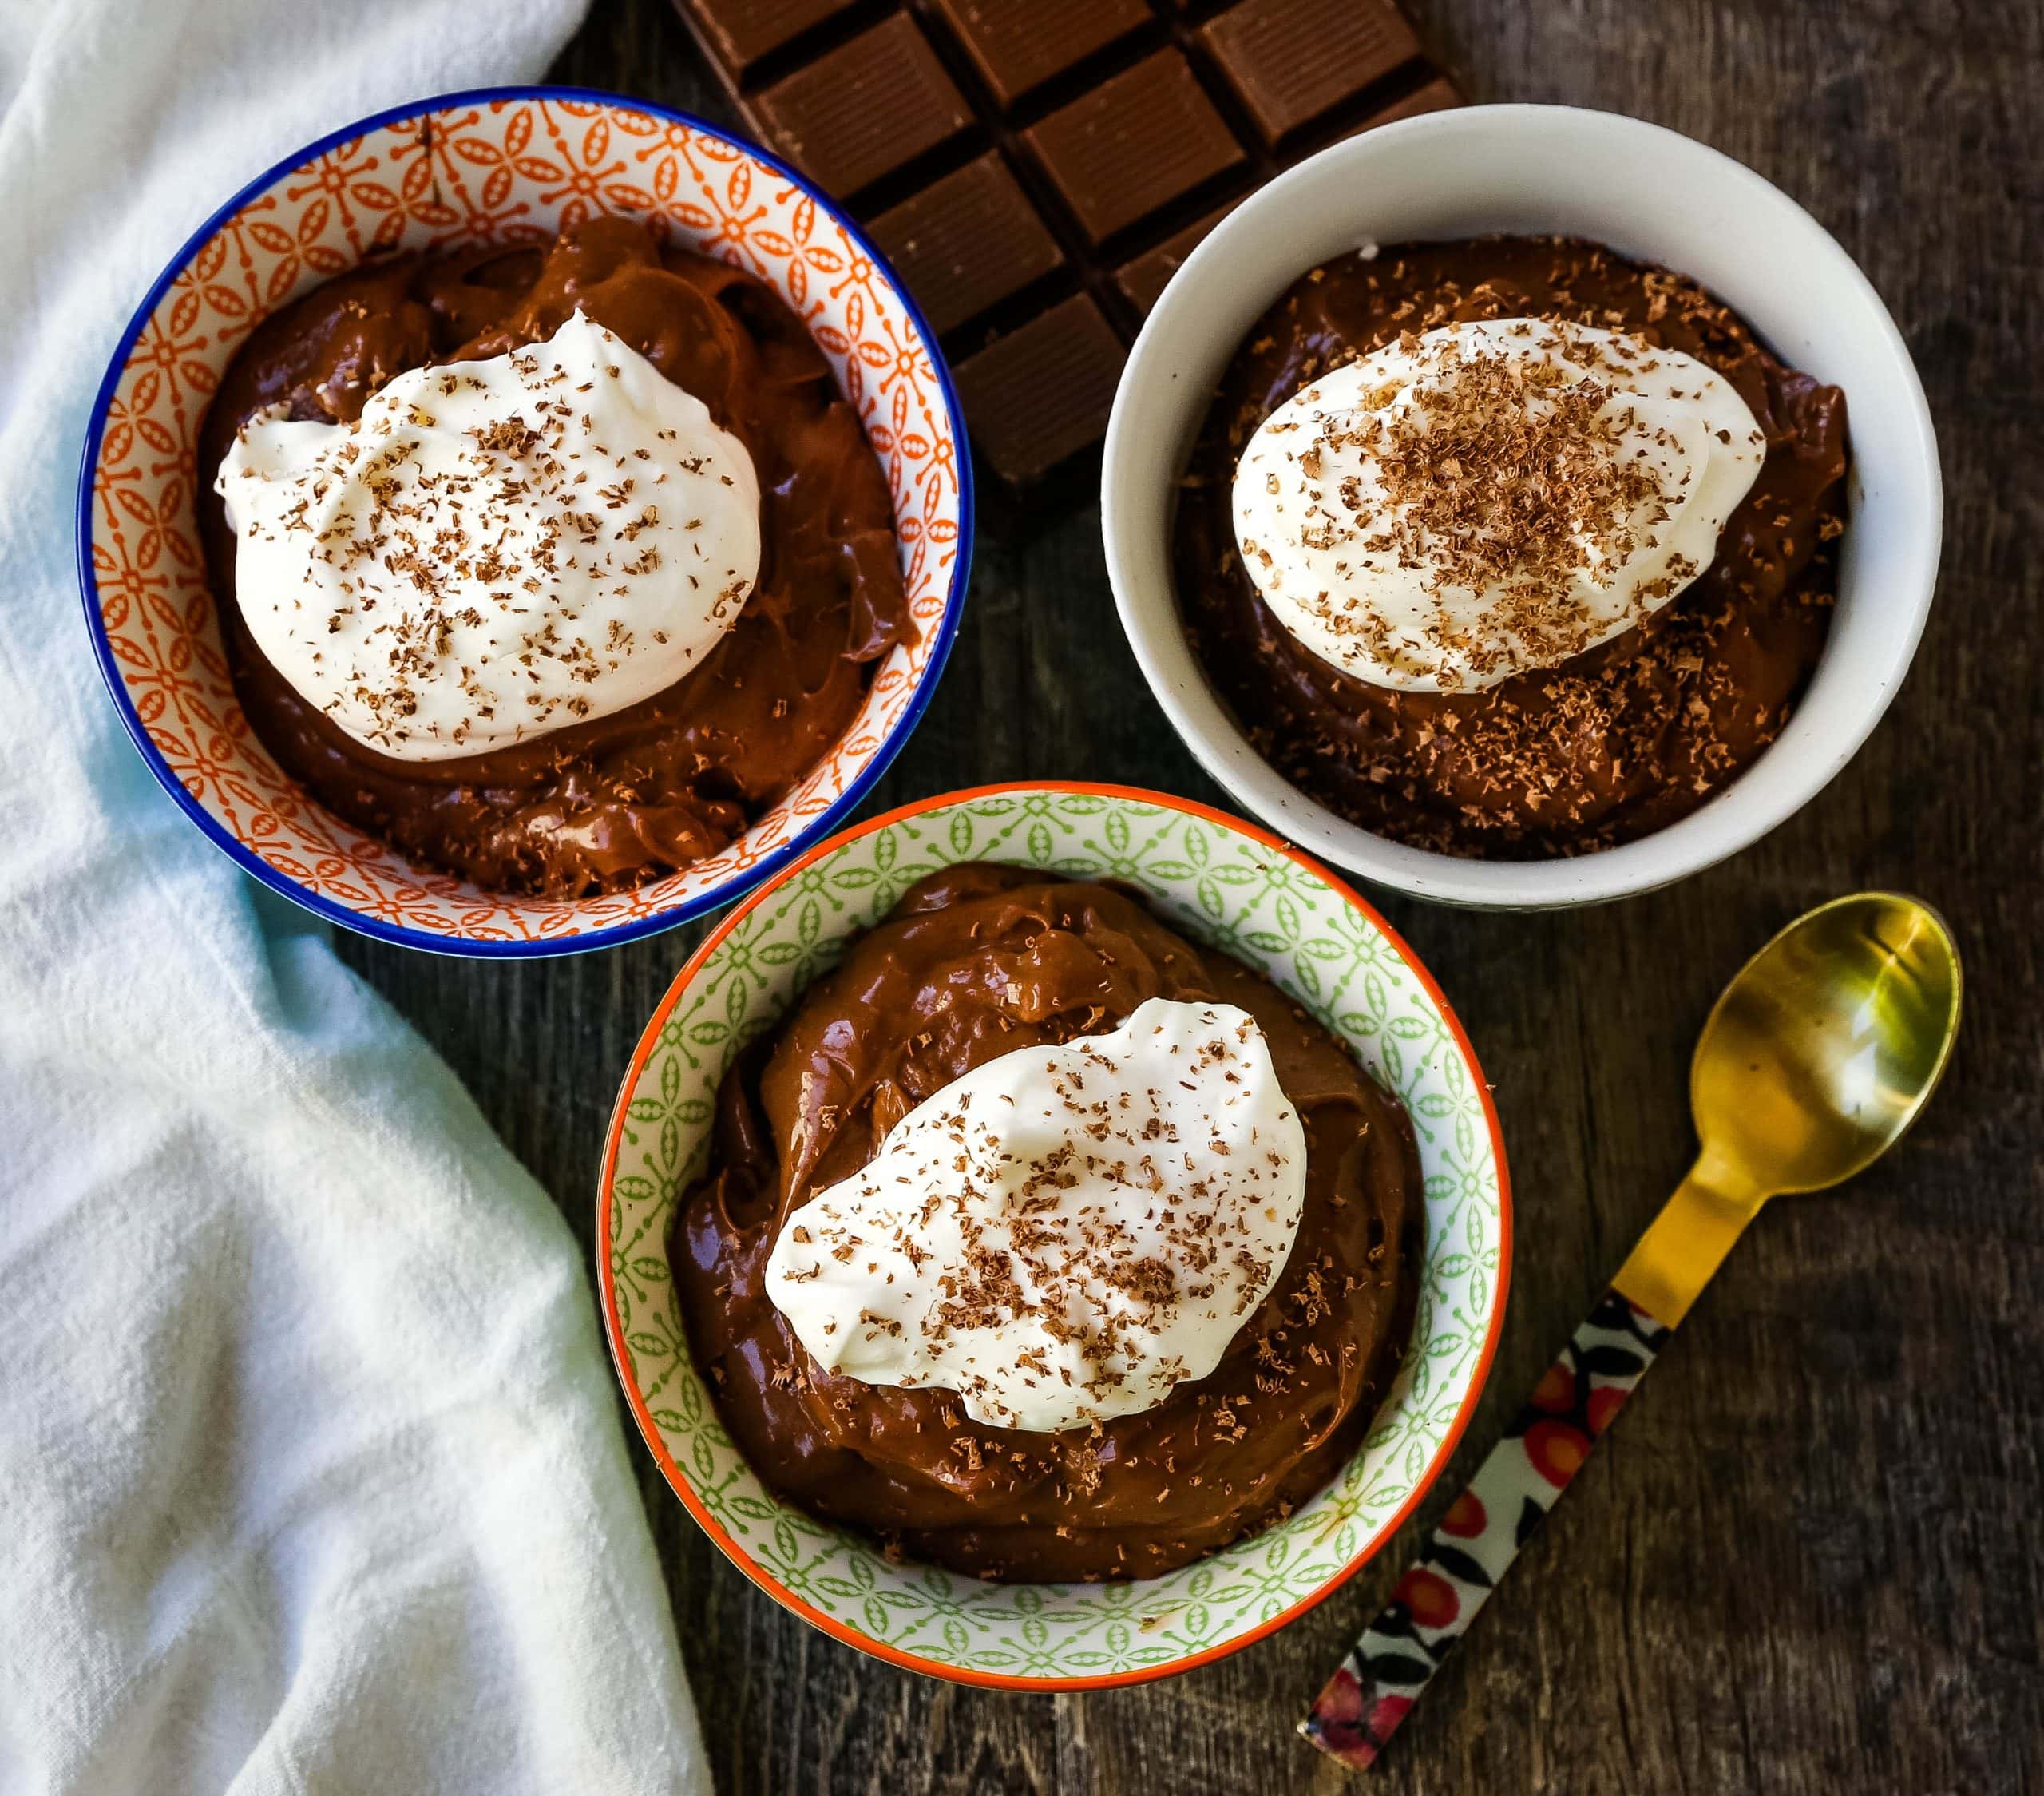 Chocolate Pudding Rich, decadent homemade chocolate pudding made with only 5 simple ingredients. The best chocolate pudding recipe! www.modernhoney.com #chocolate #chocolatepudding #pudding